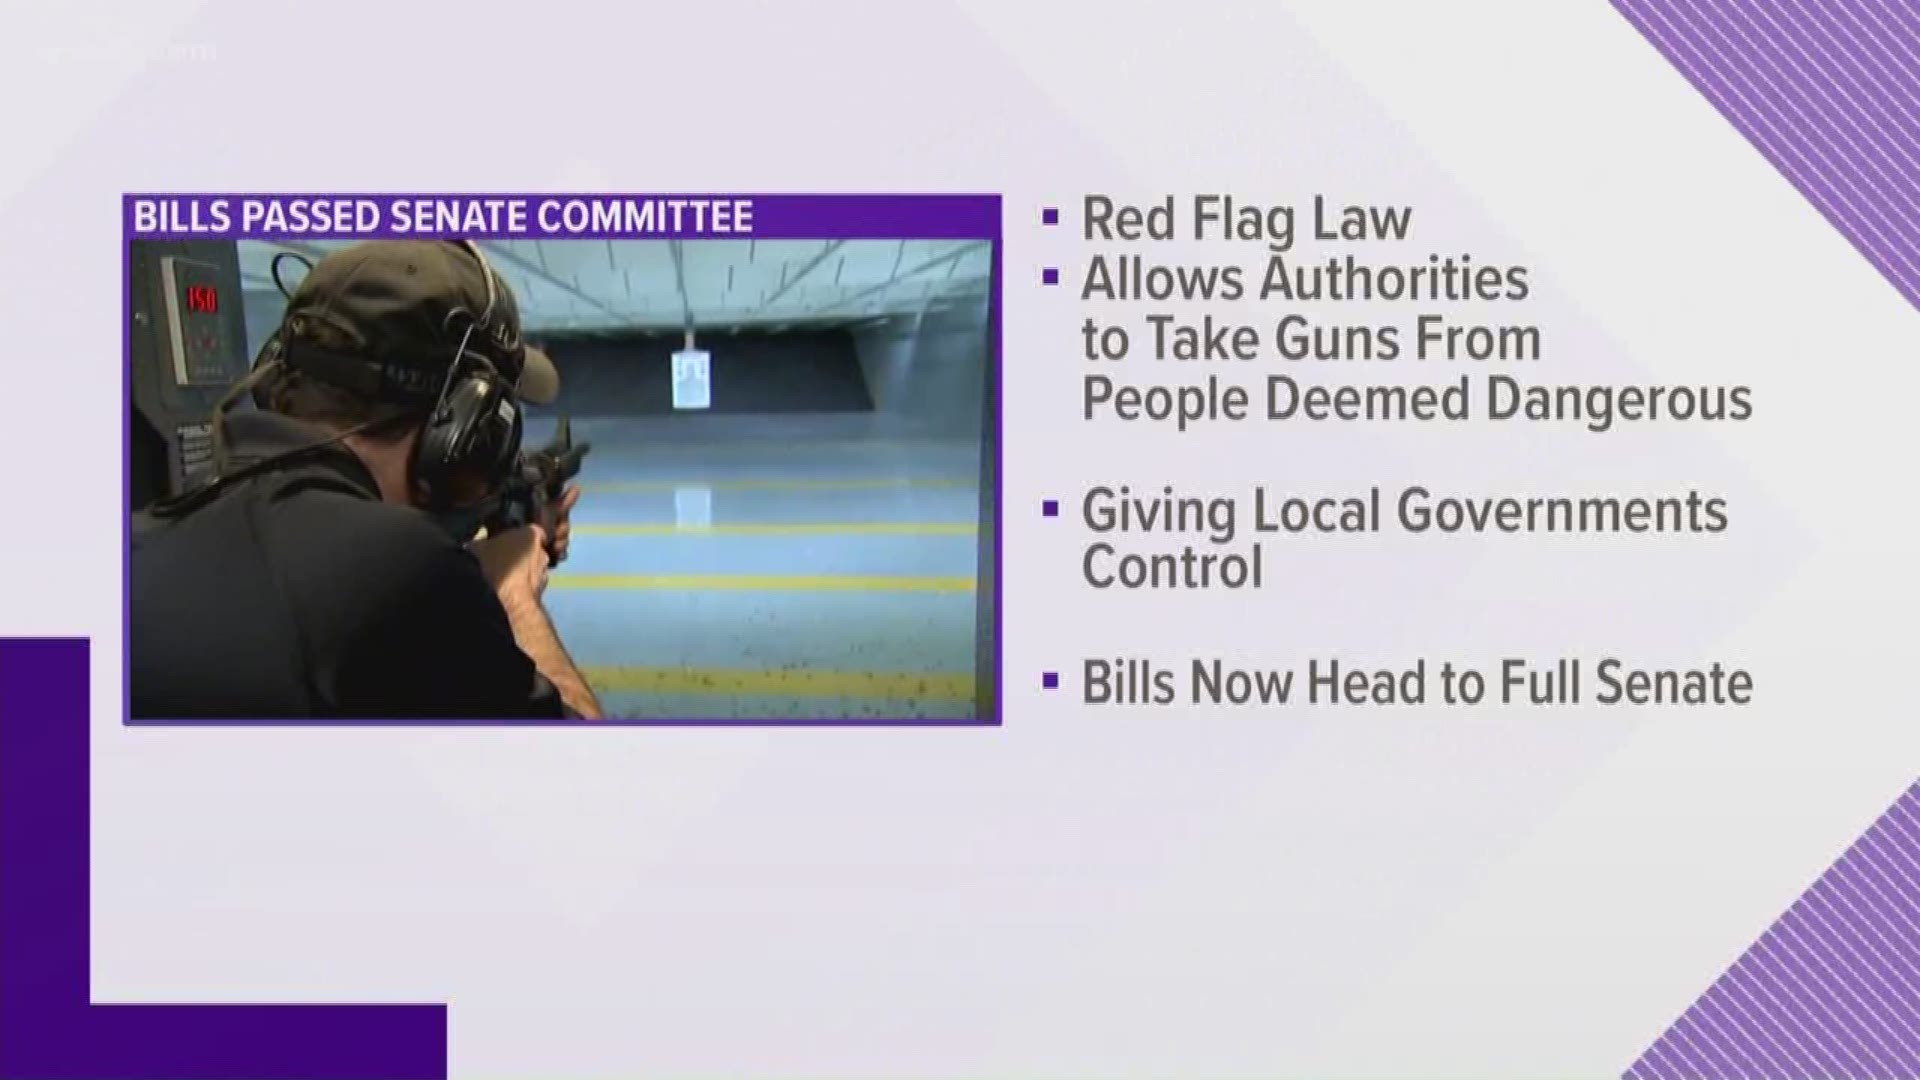 Here's a look at some of the legislation that passed.